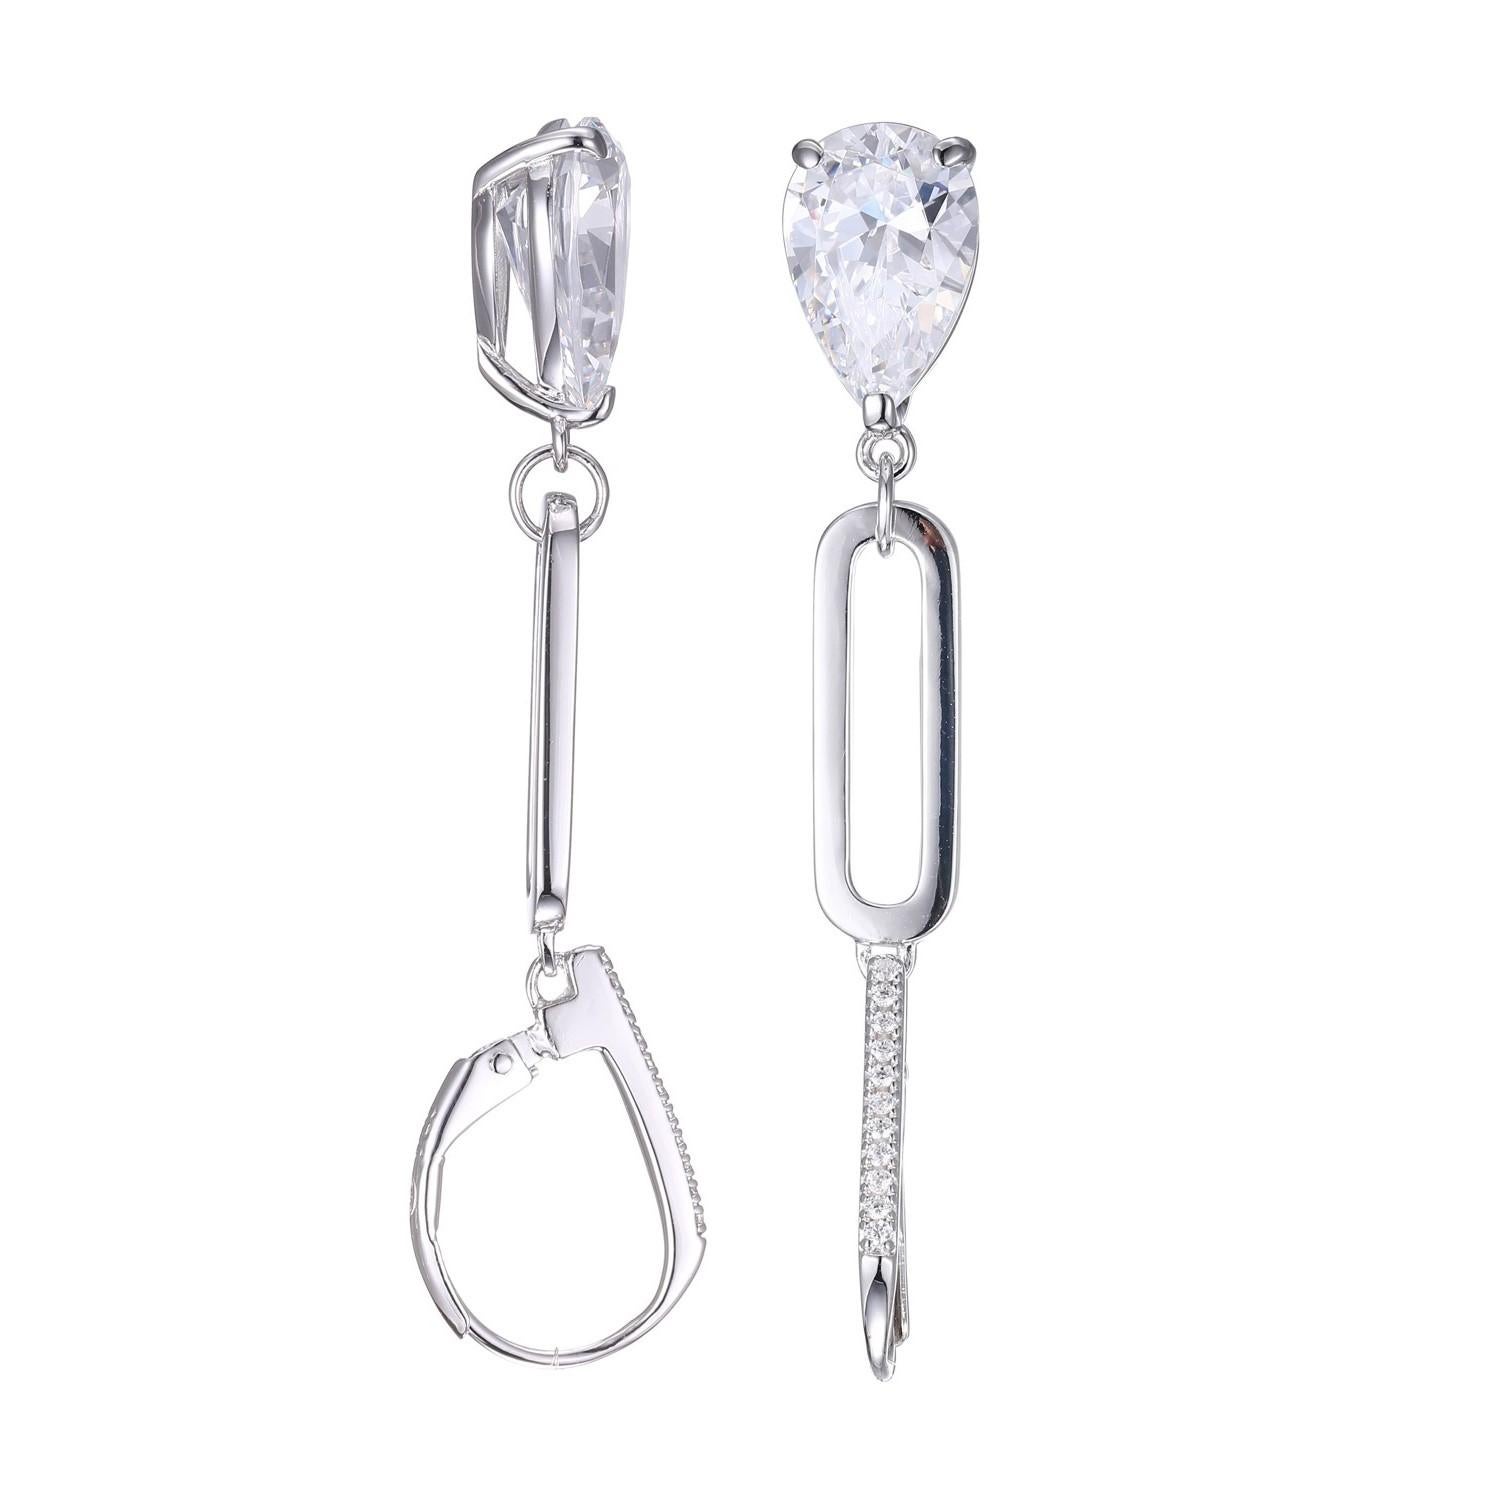 Pear Cut Sterling Silver Earrings with CZ (12x8mm), Lever Back, Rhodium Finish For Sale